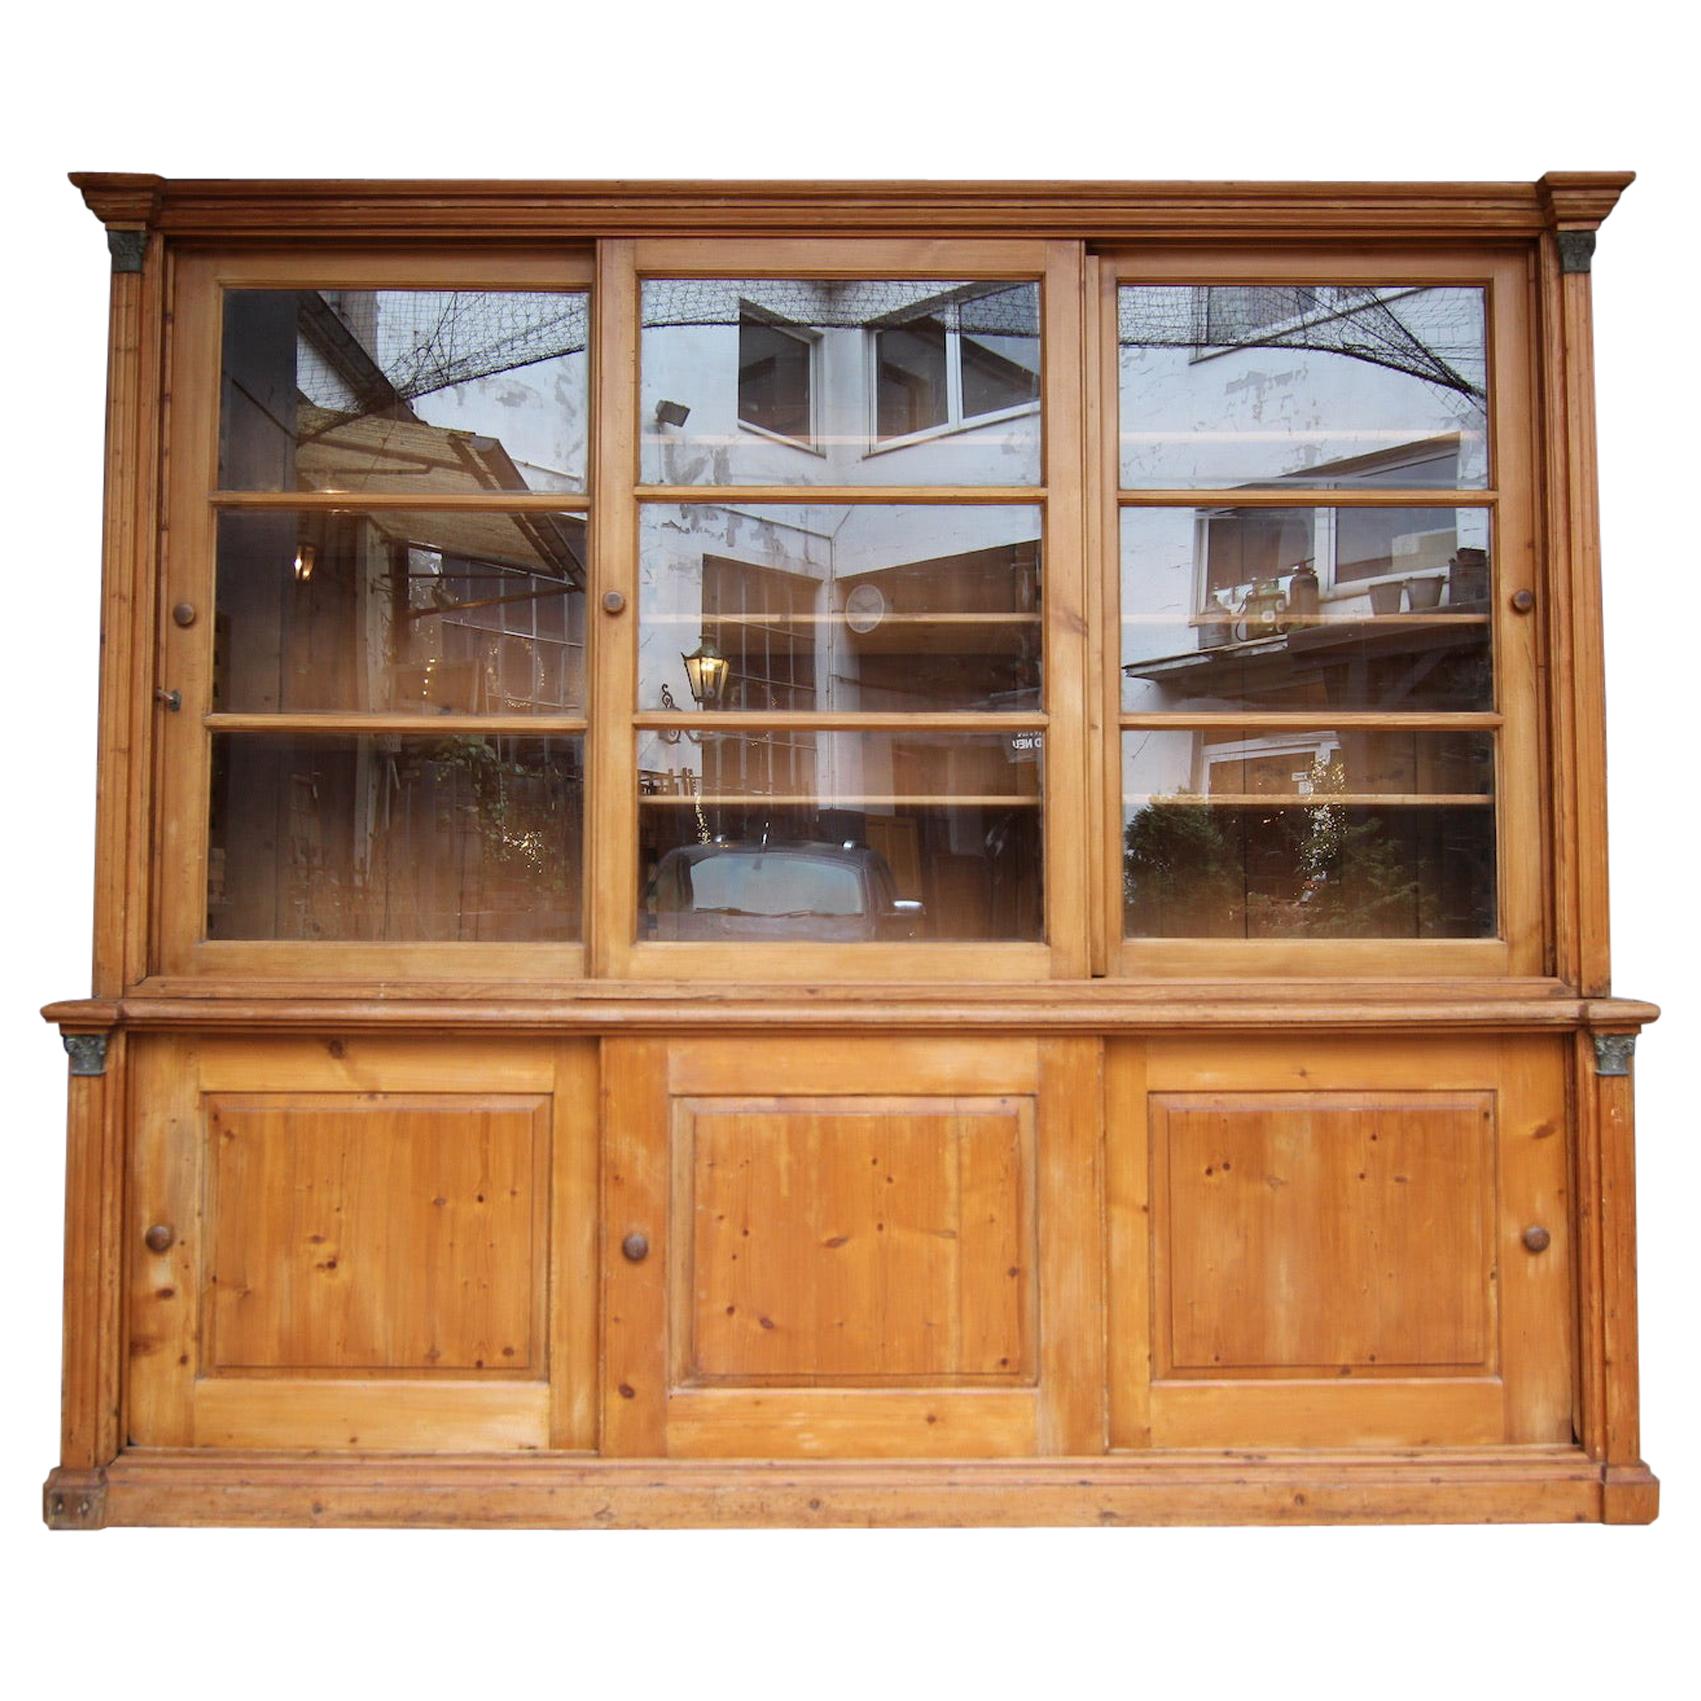 Large Late 19th Century English Pine Shop Display Cabinet with Sliding Doors